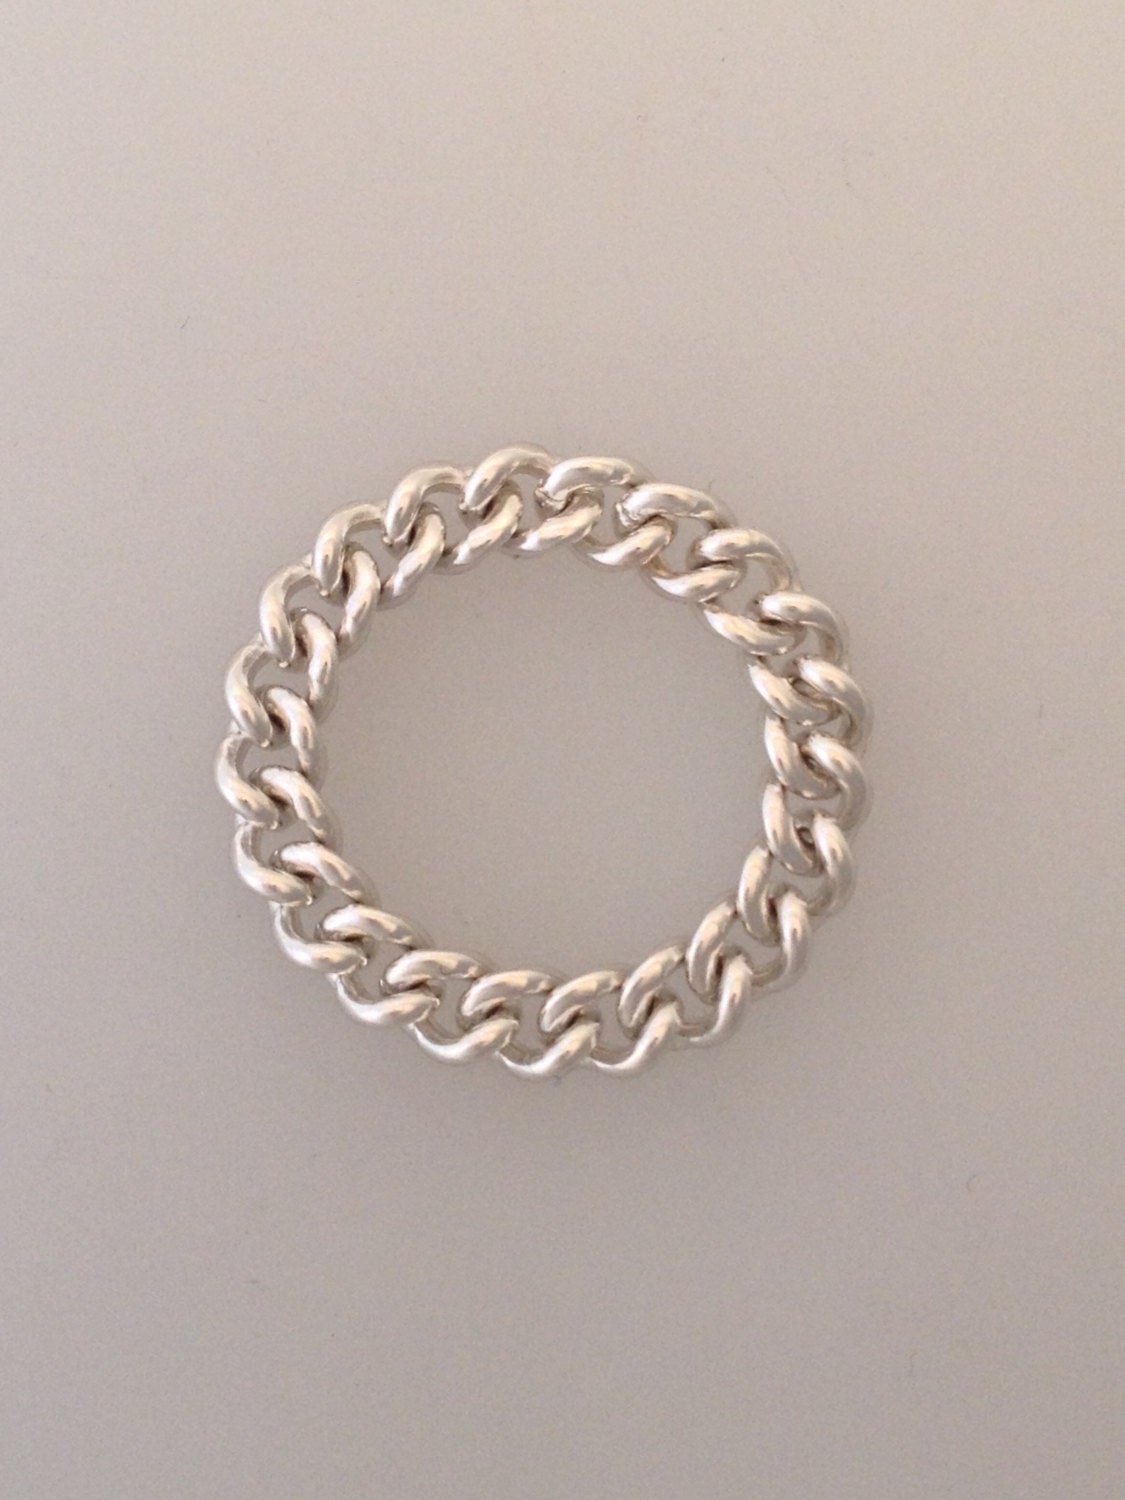 Silver Chain Ring Made Of Stainless Steel